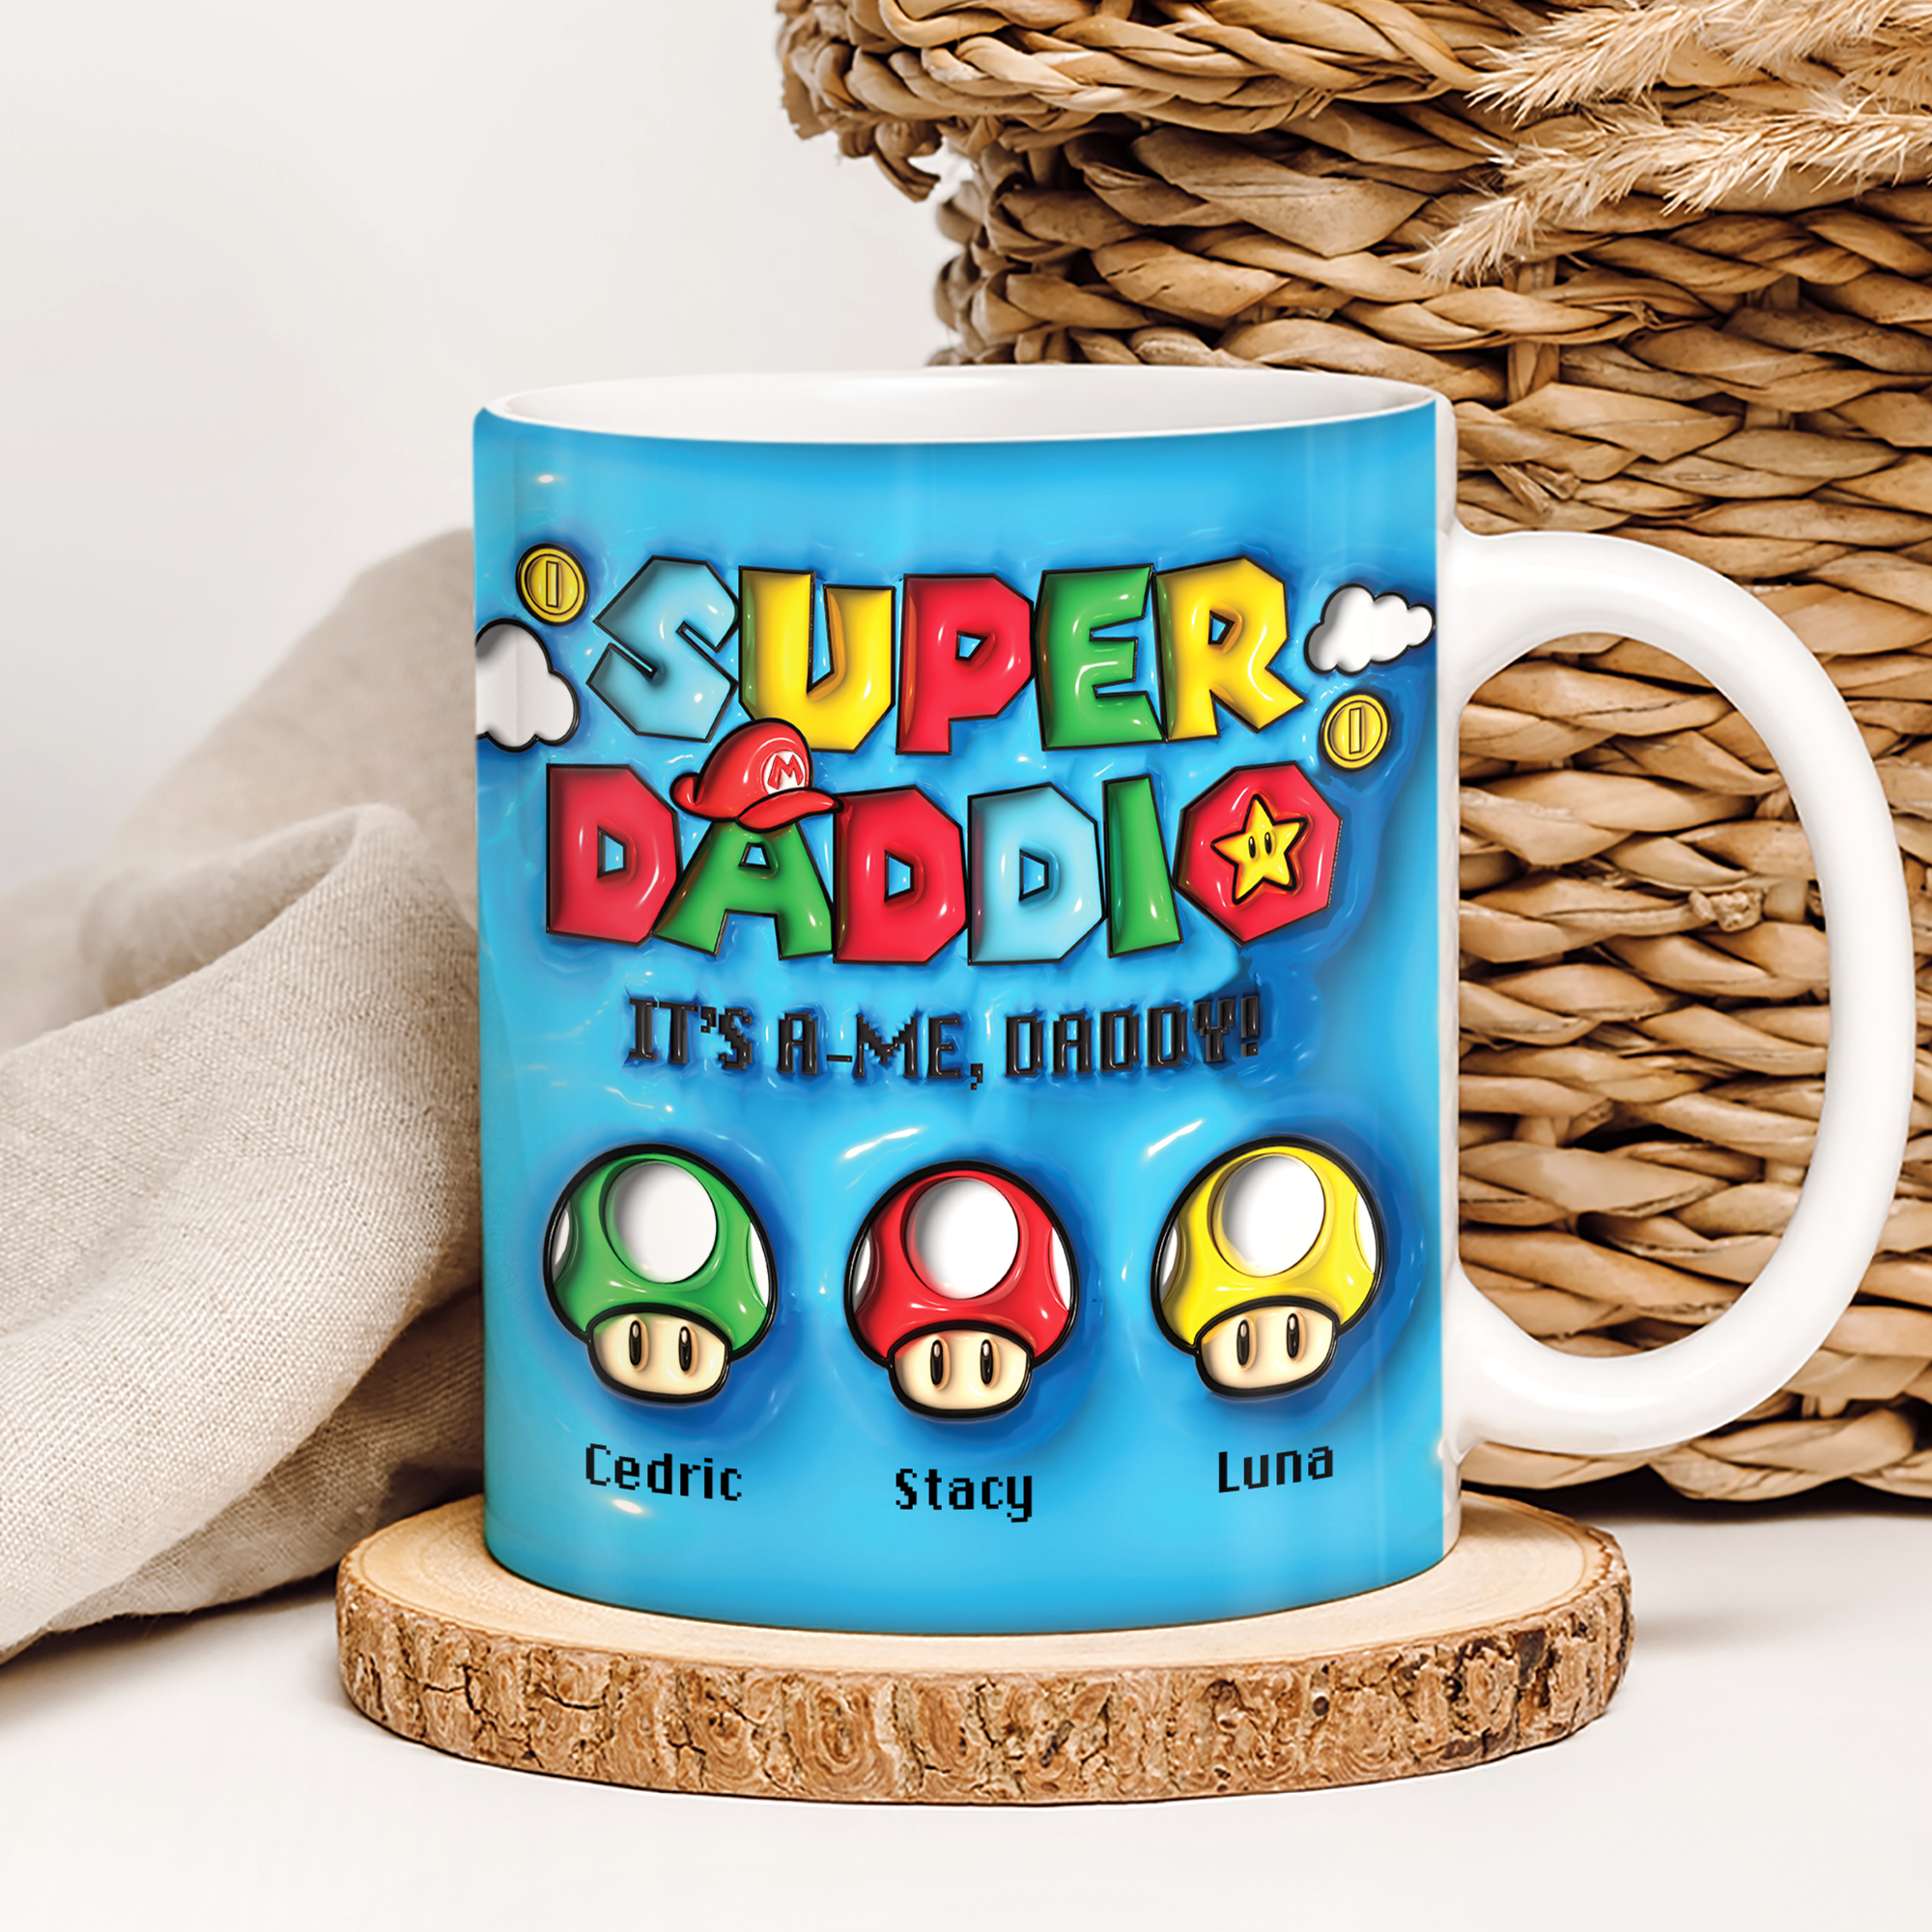 Personalized Gifts For Dad Coffee Mug 012HUHU020524 Father's Day